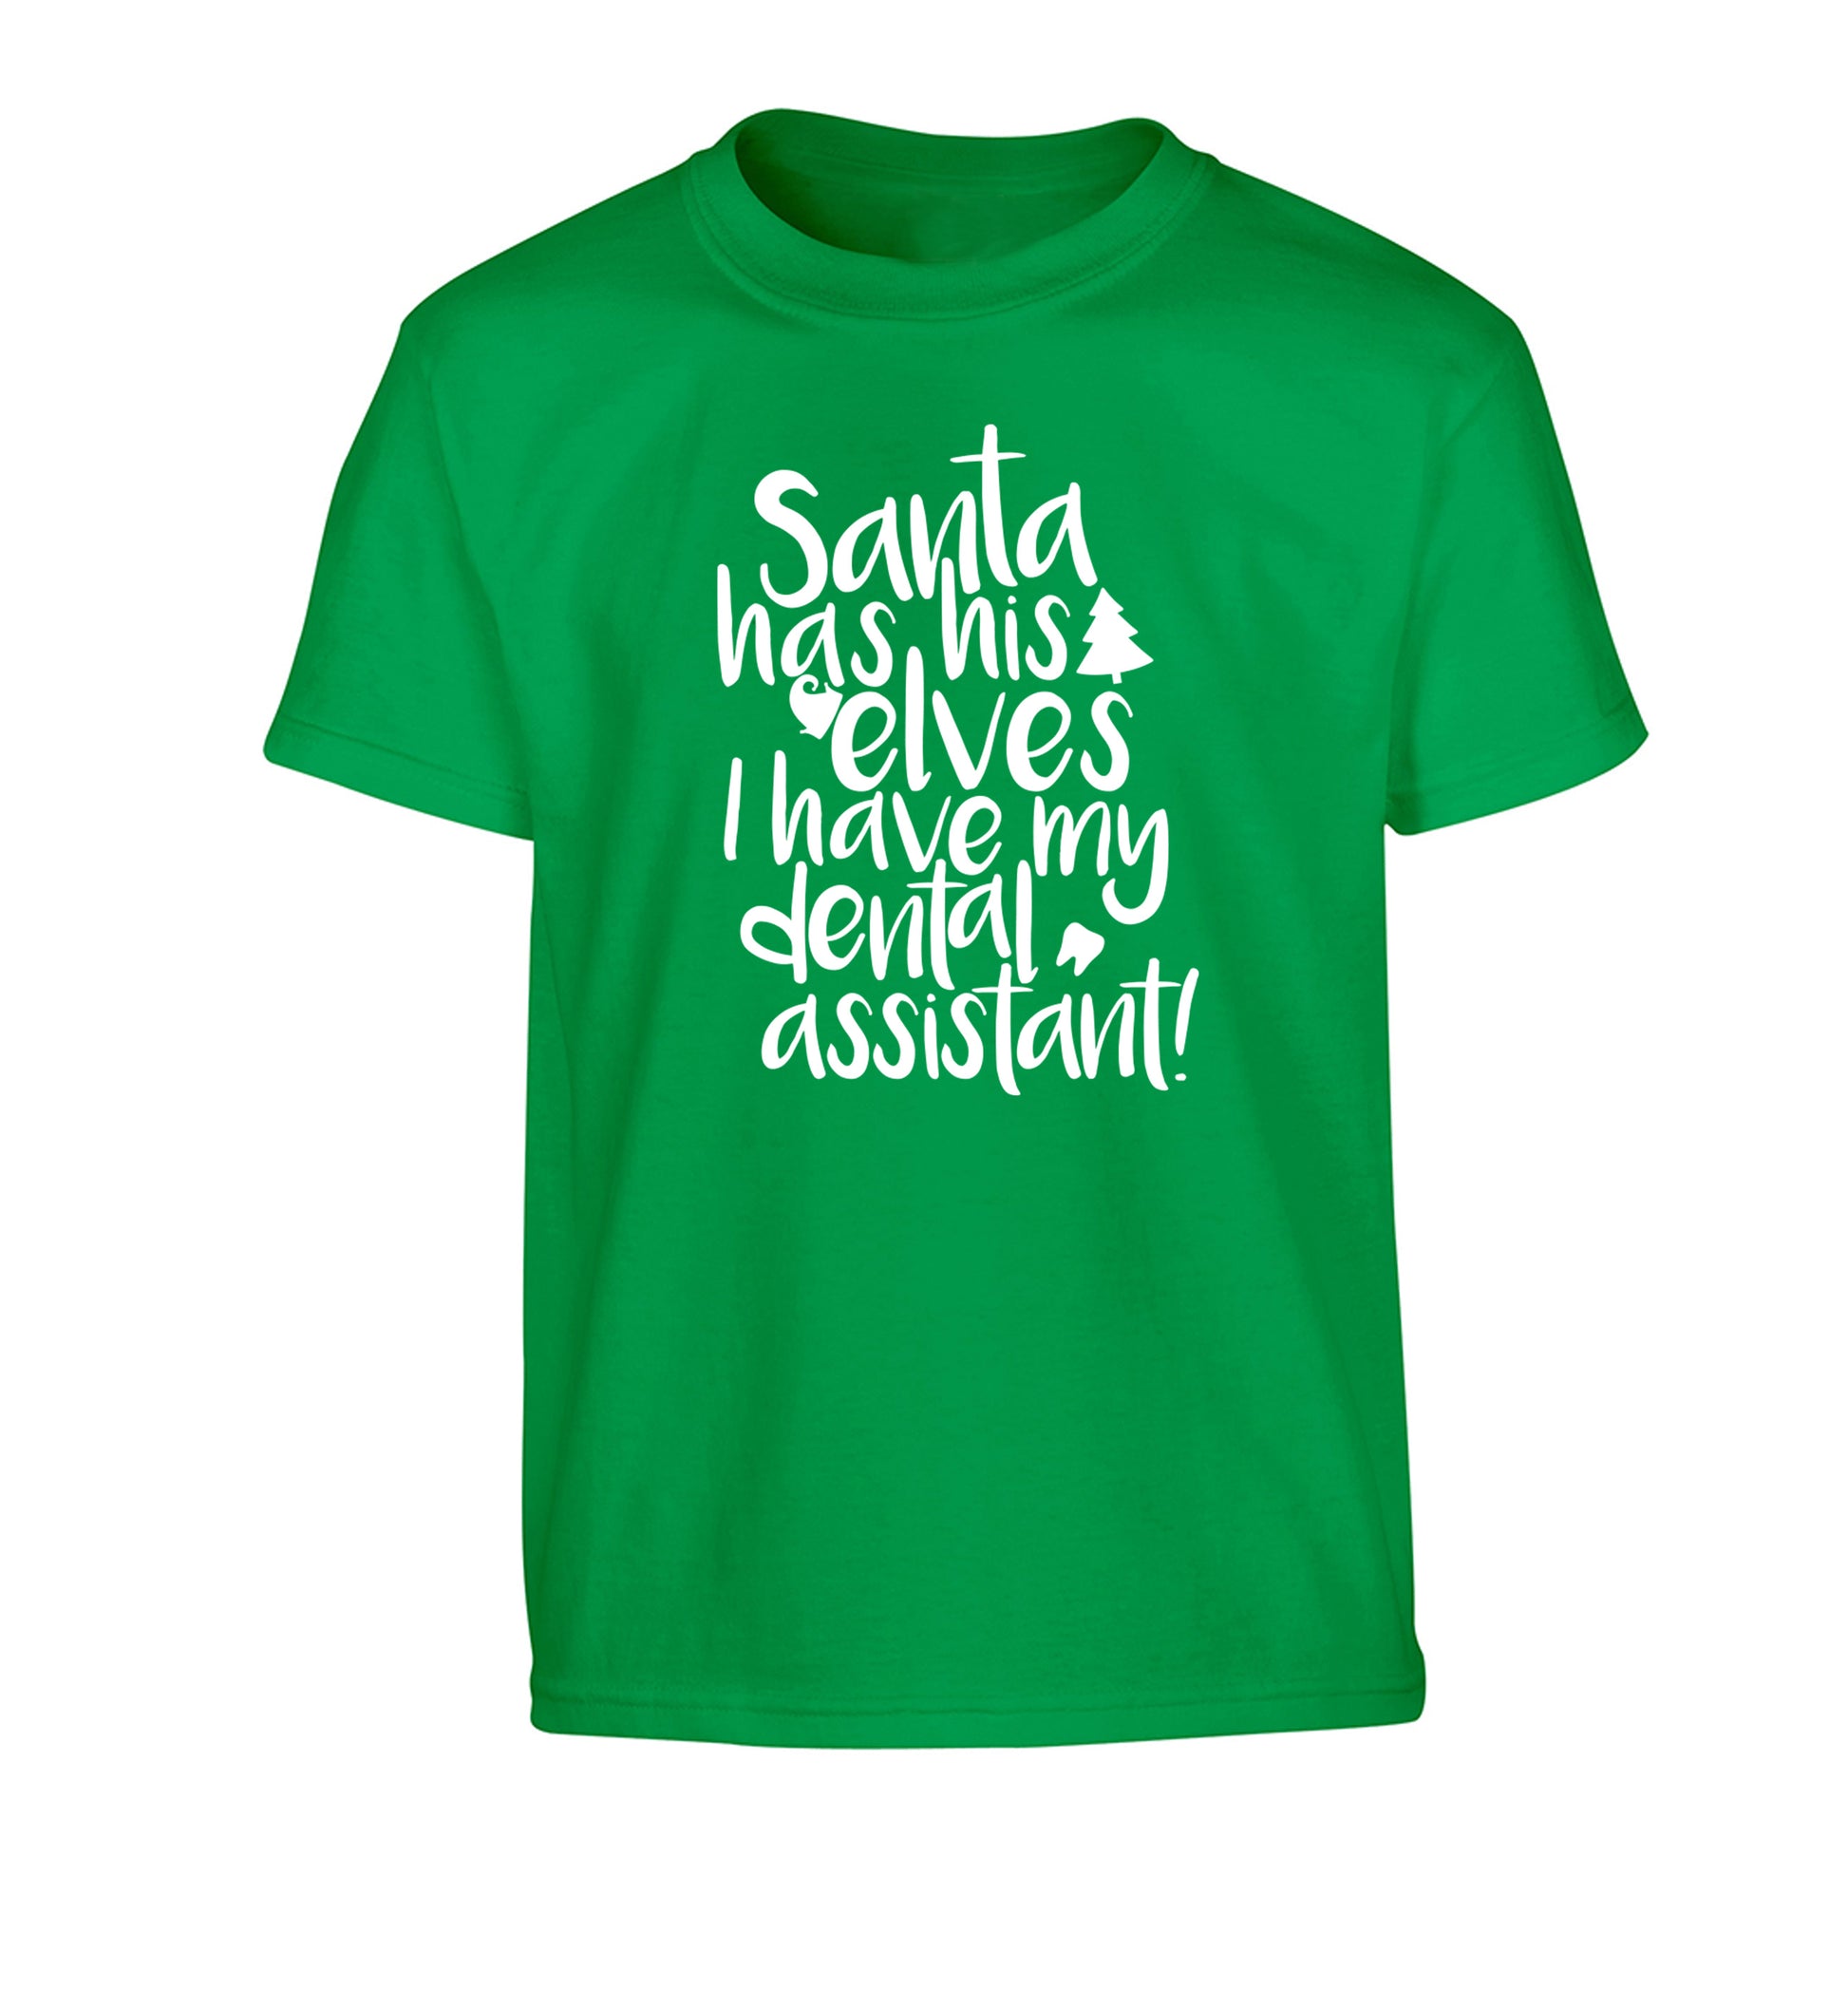 Santa has his elves I have my dental assistant Children's green Tshirt 12-14 Years